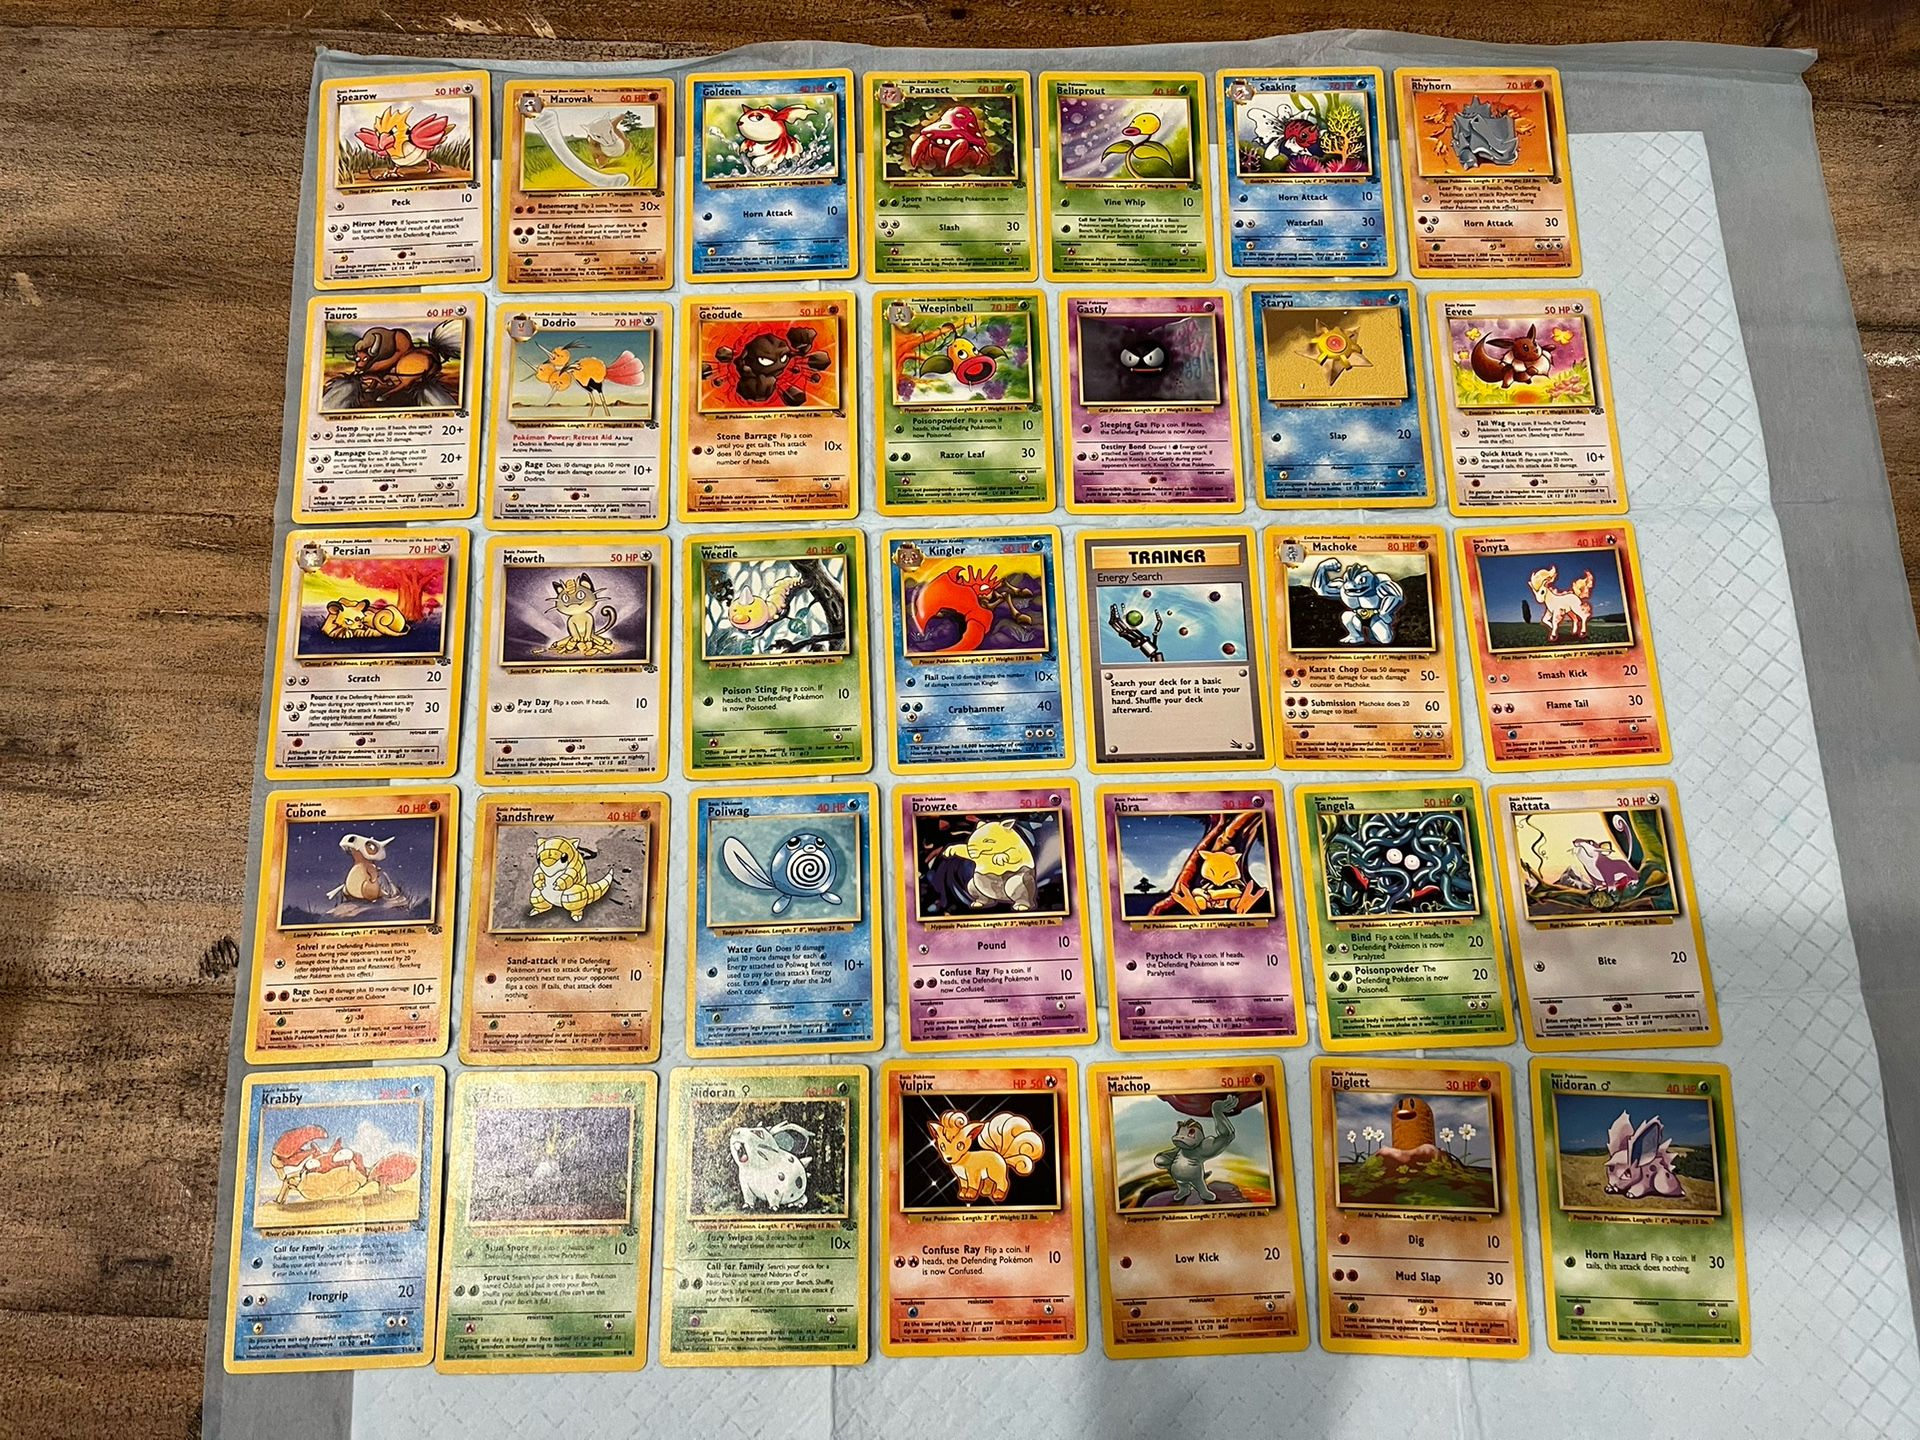 35 Assorted Wizards Of The Coast Pokemon Cards